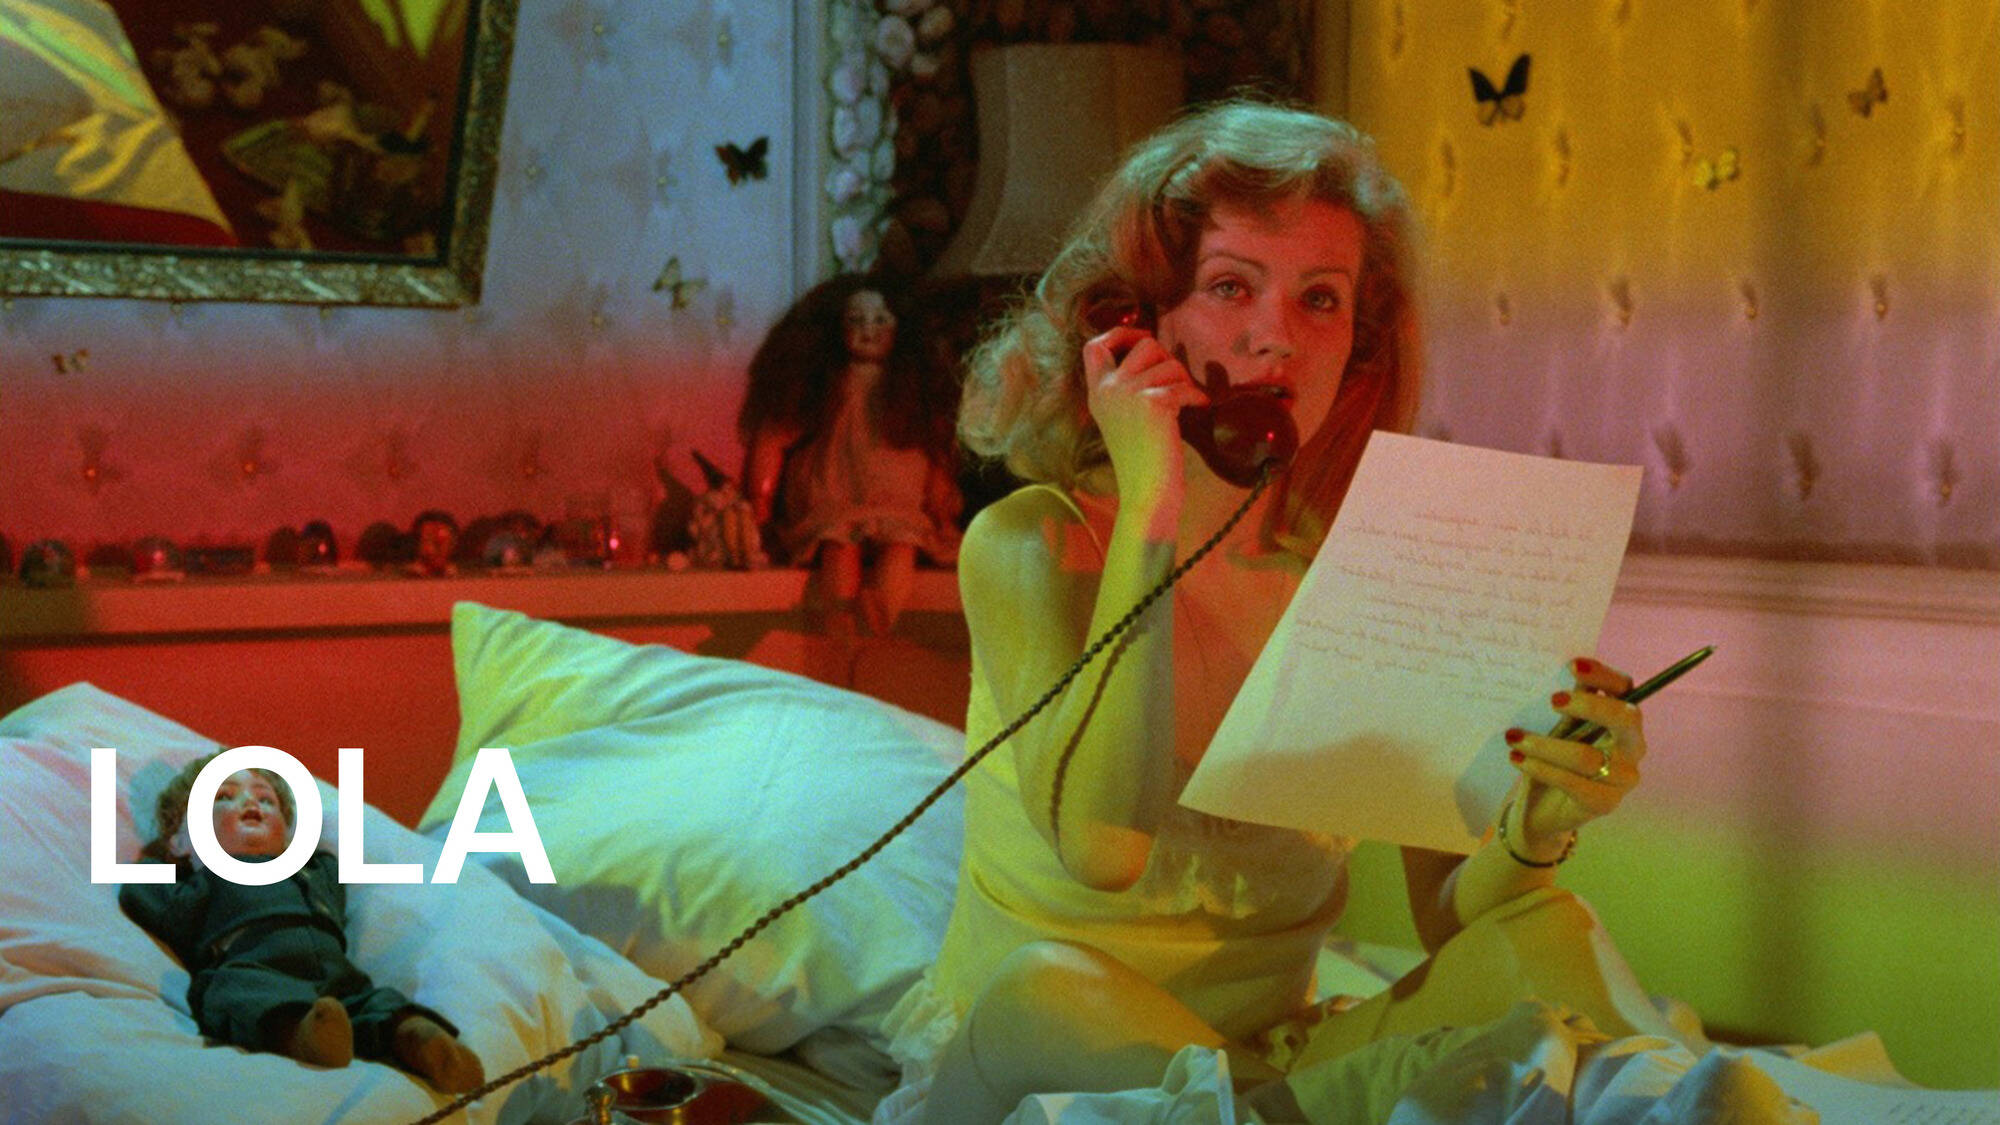 43-facts-about-the-movie-lola